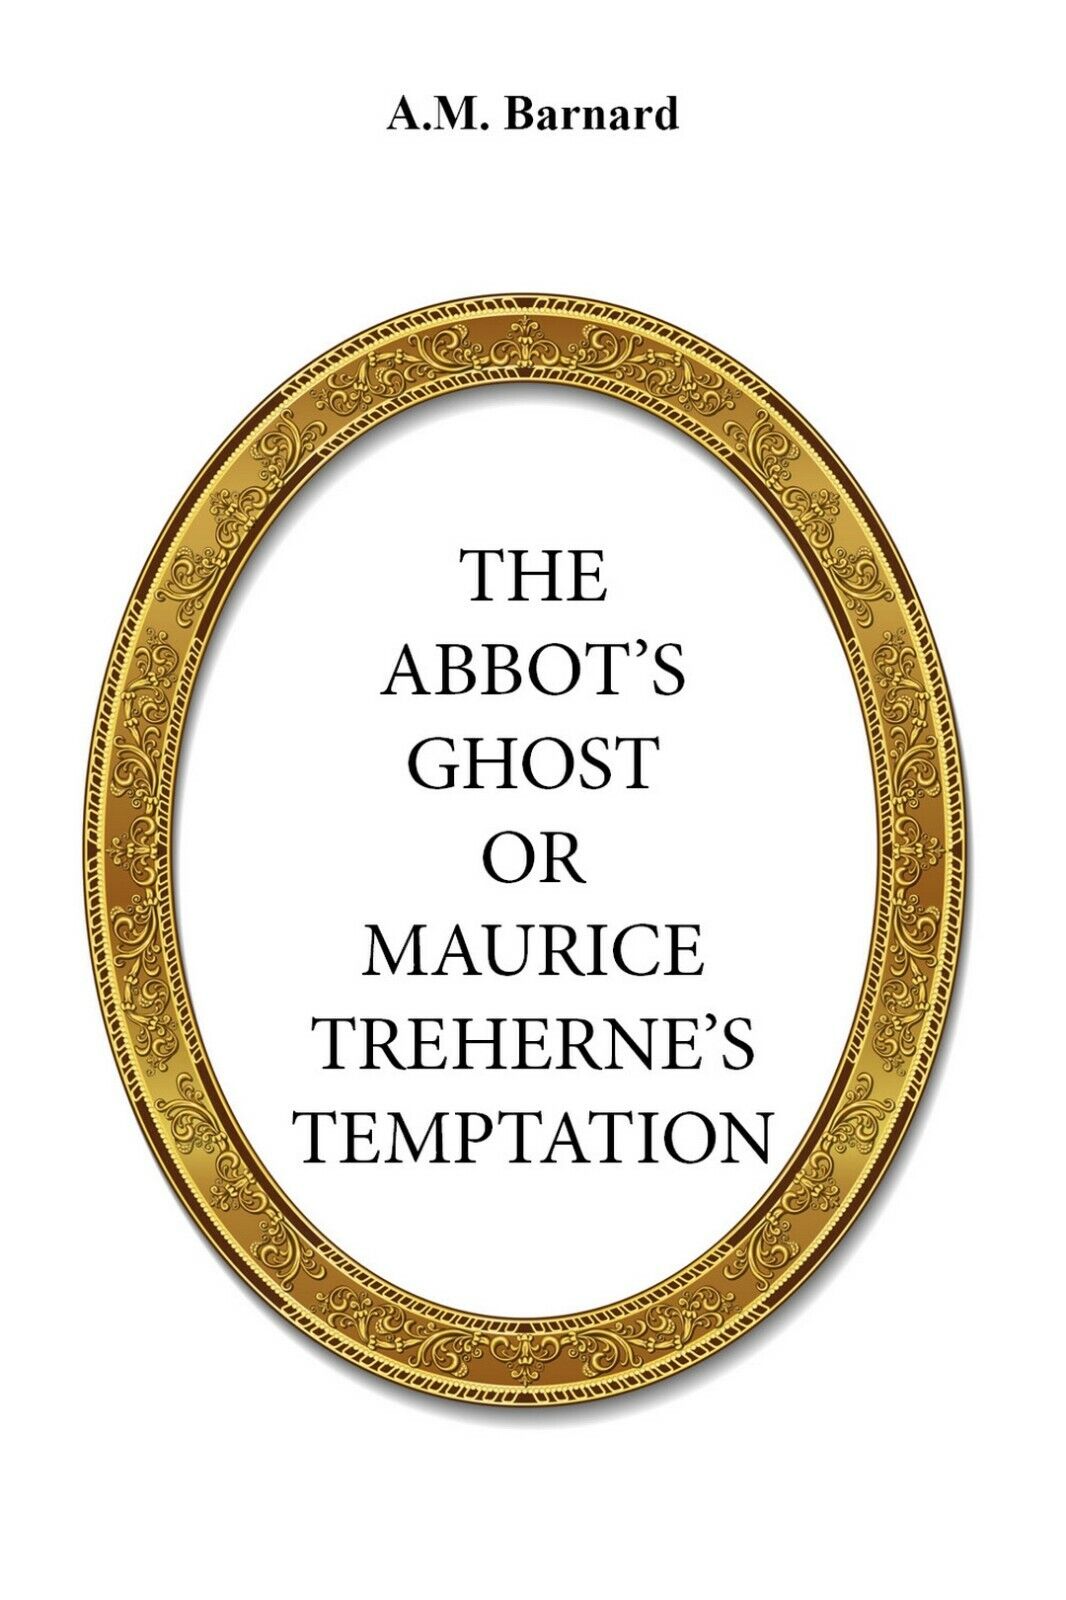 The Abbot?s Ghost, Or Maurice Treherne?s Temptation  di A. M. Barnard,  2017